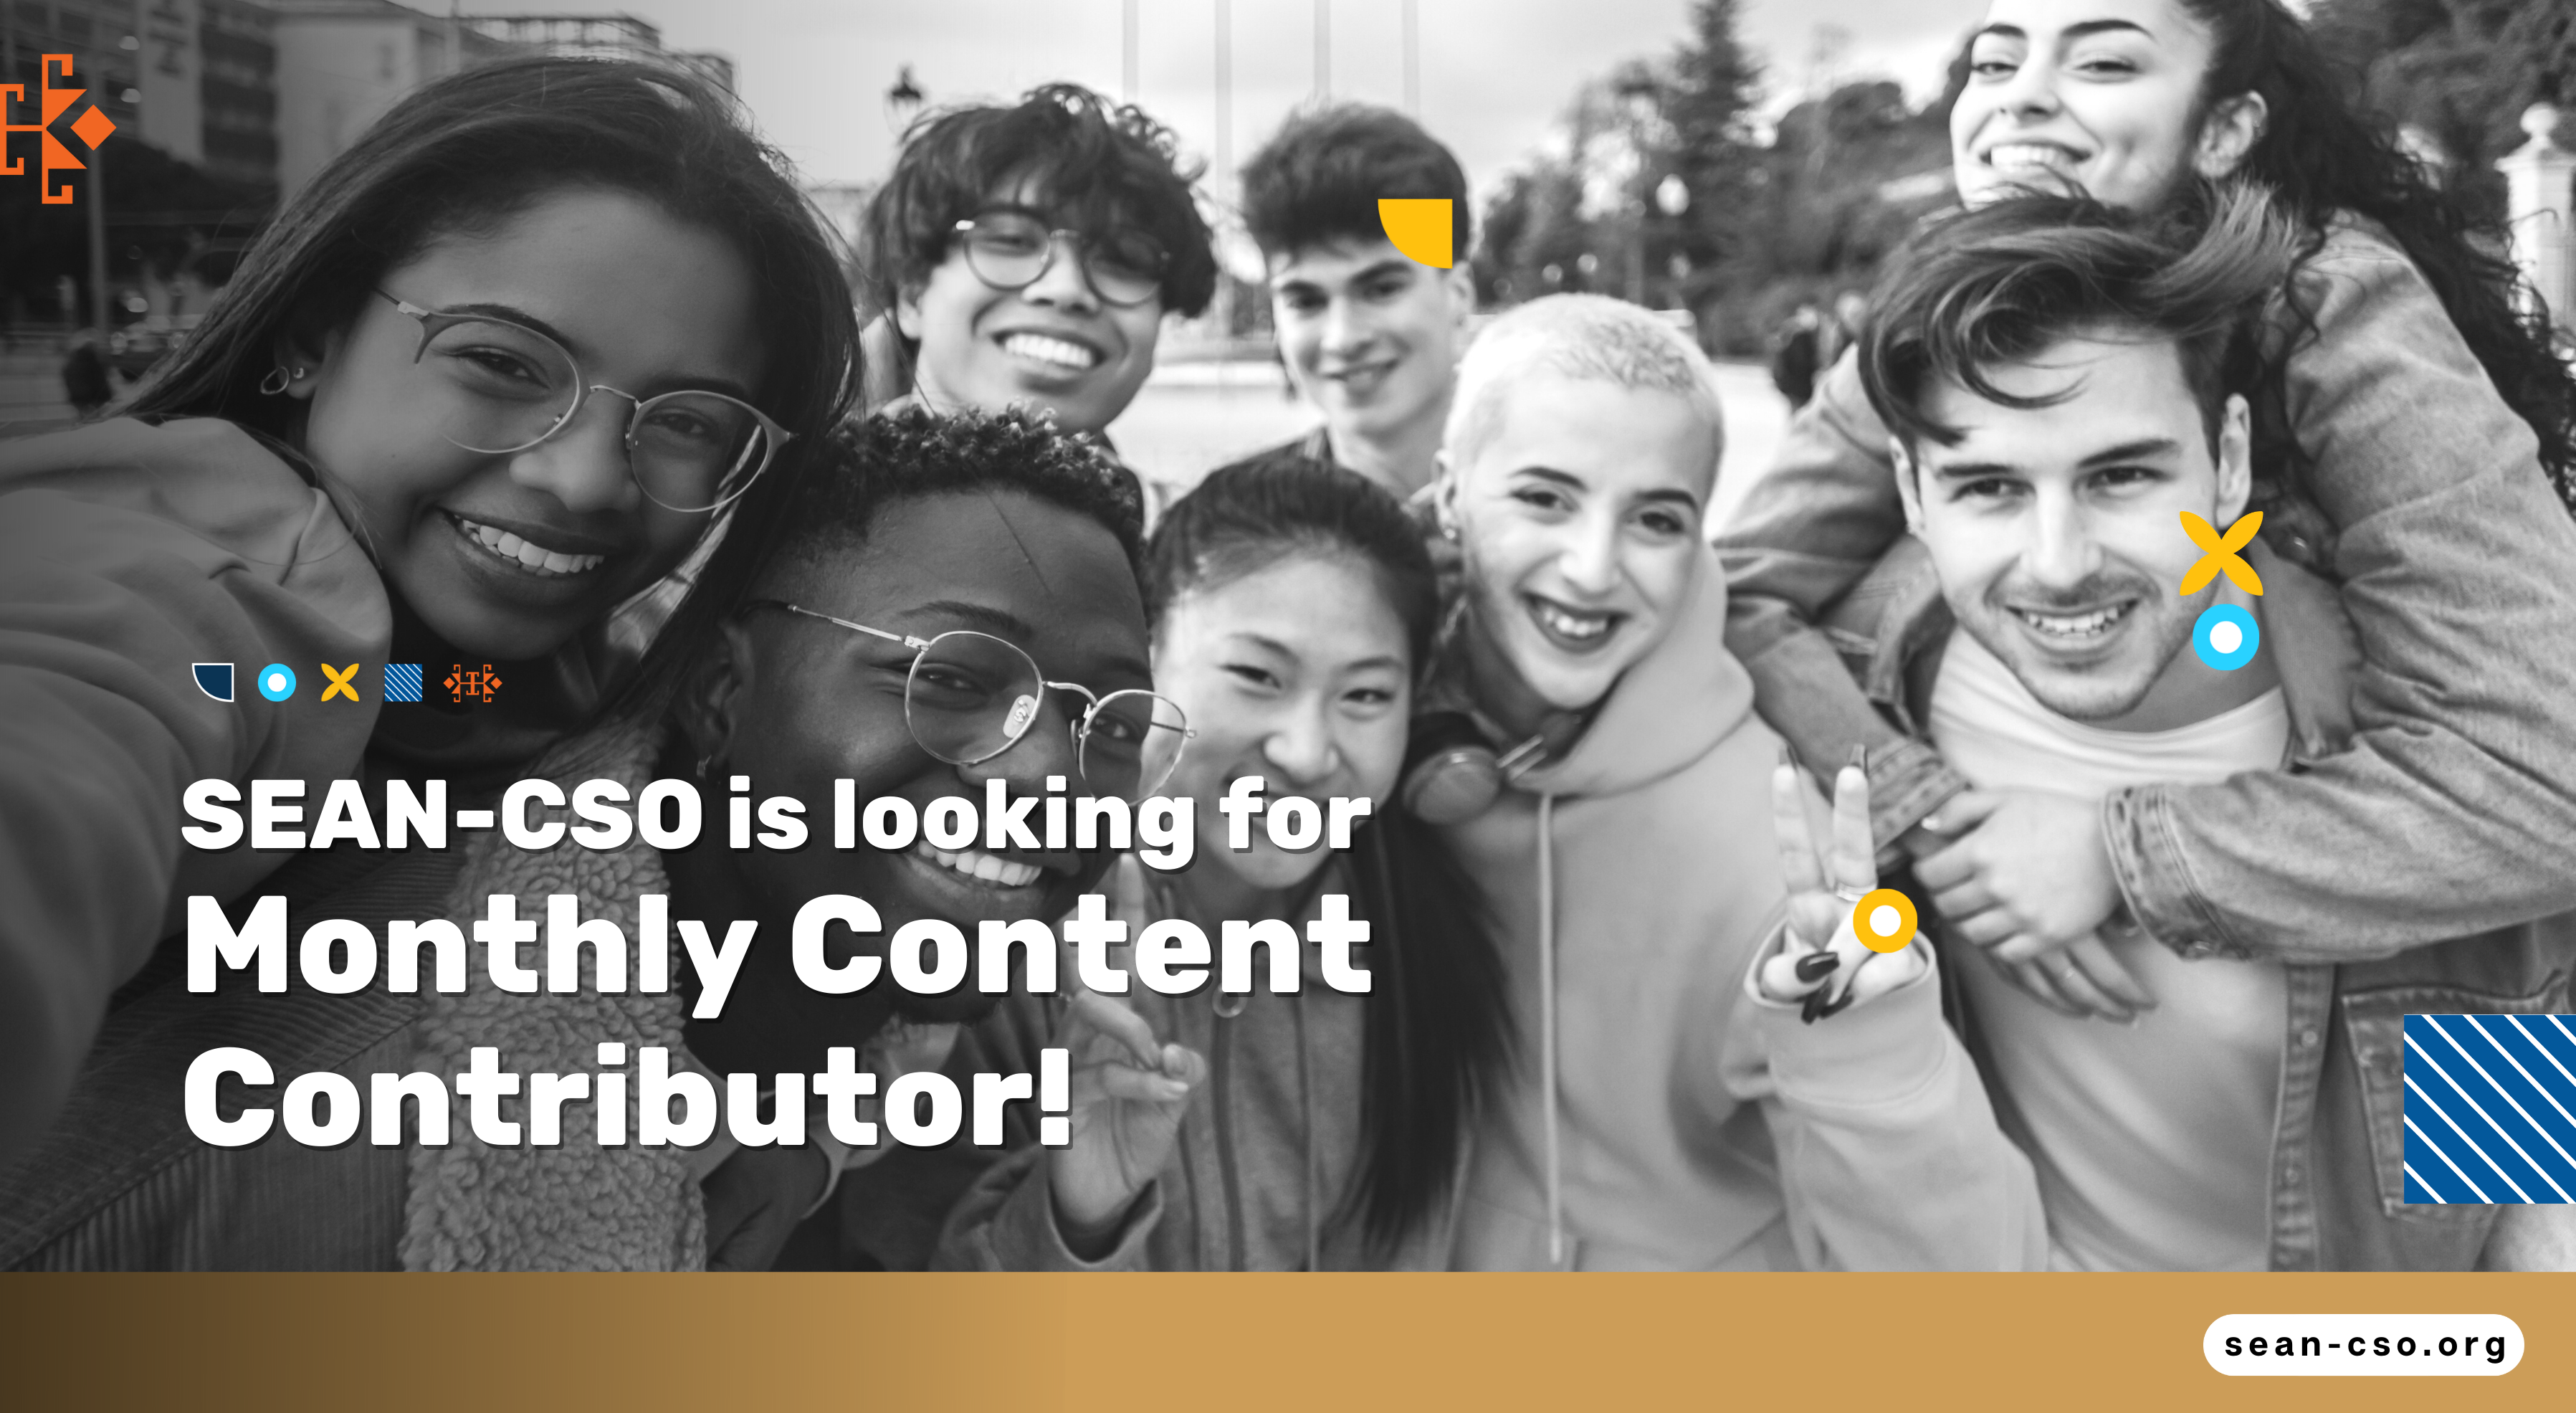 SEAN-CSO is looking for Our Monthly Content Contributor!